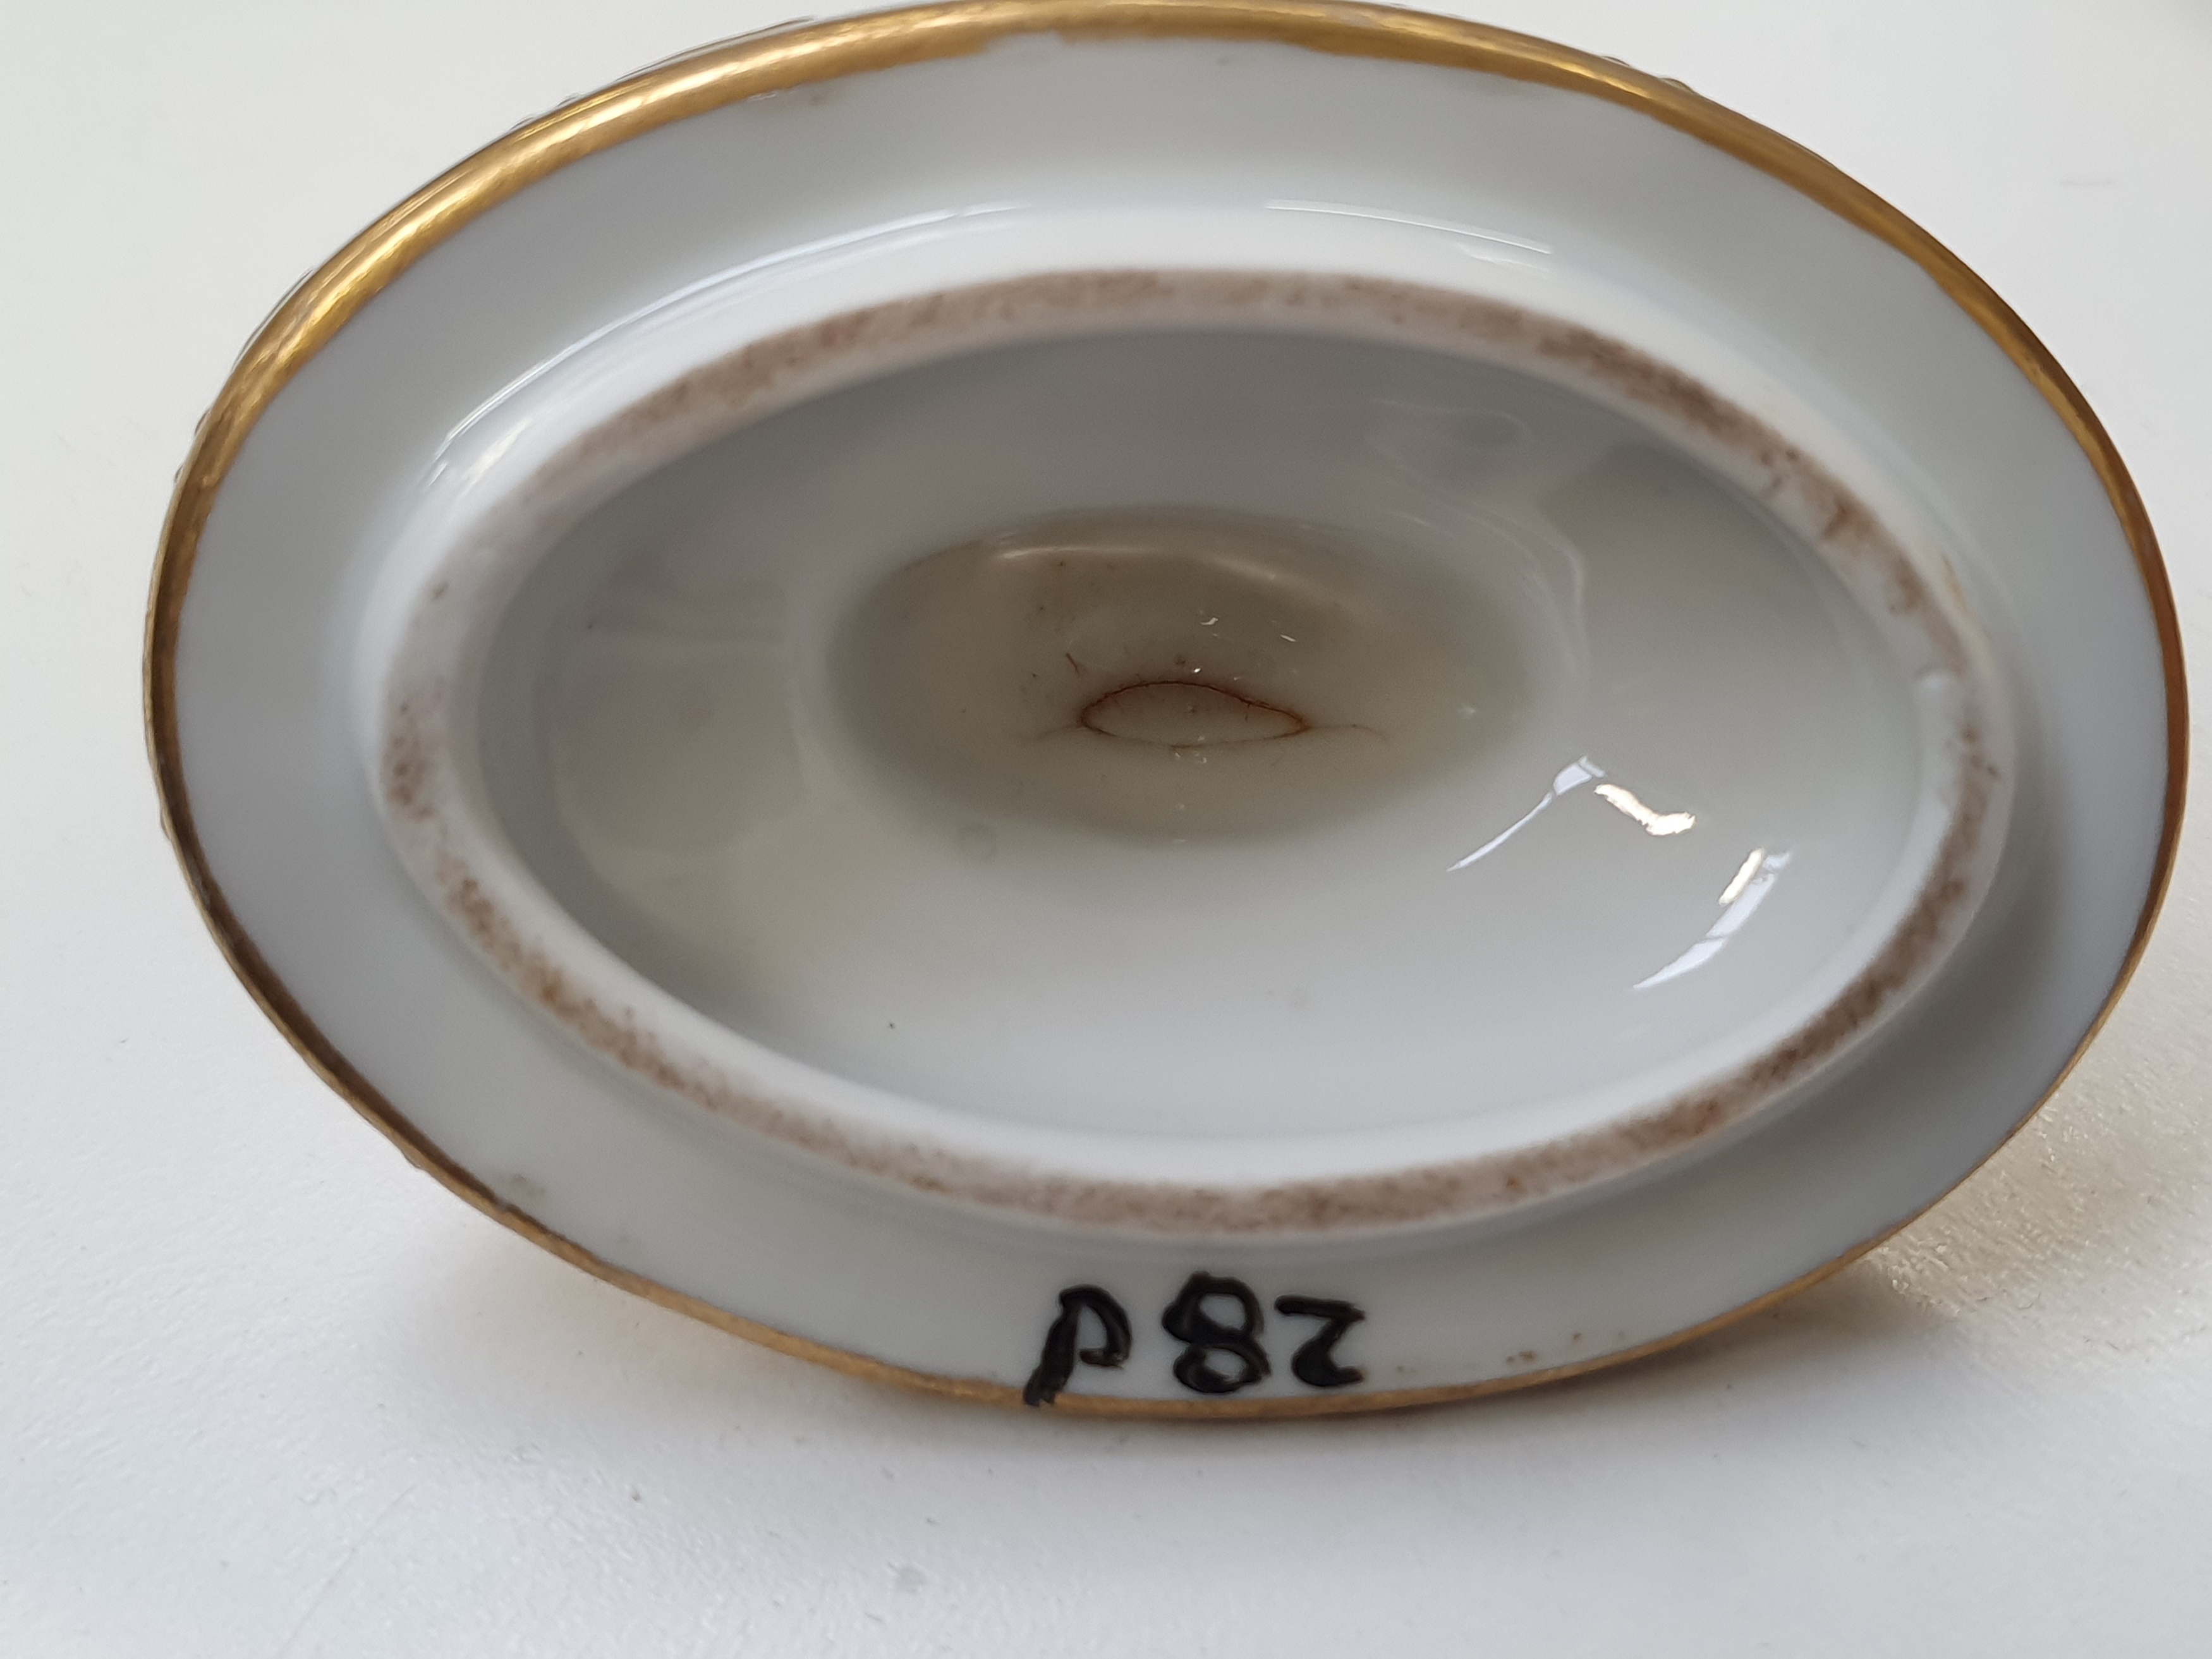 A FRENCH PARIS PORCELAIN PEN TRAY OF NEOCLASSICAL DESIGN, LATE 19TH CENTURY - Image 6 of 22